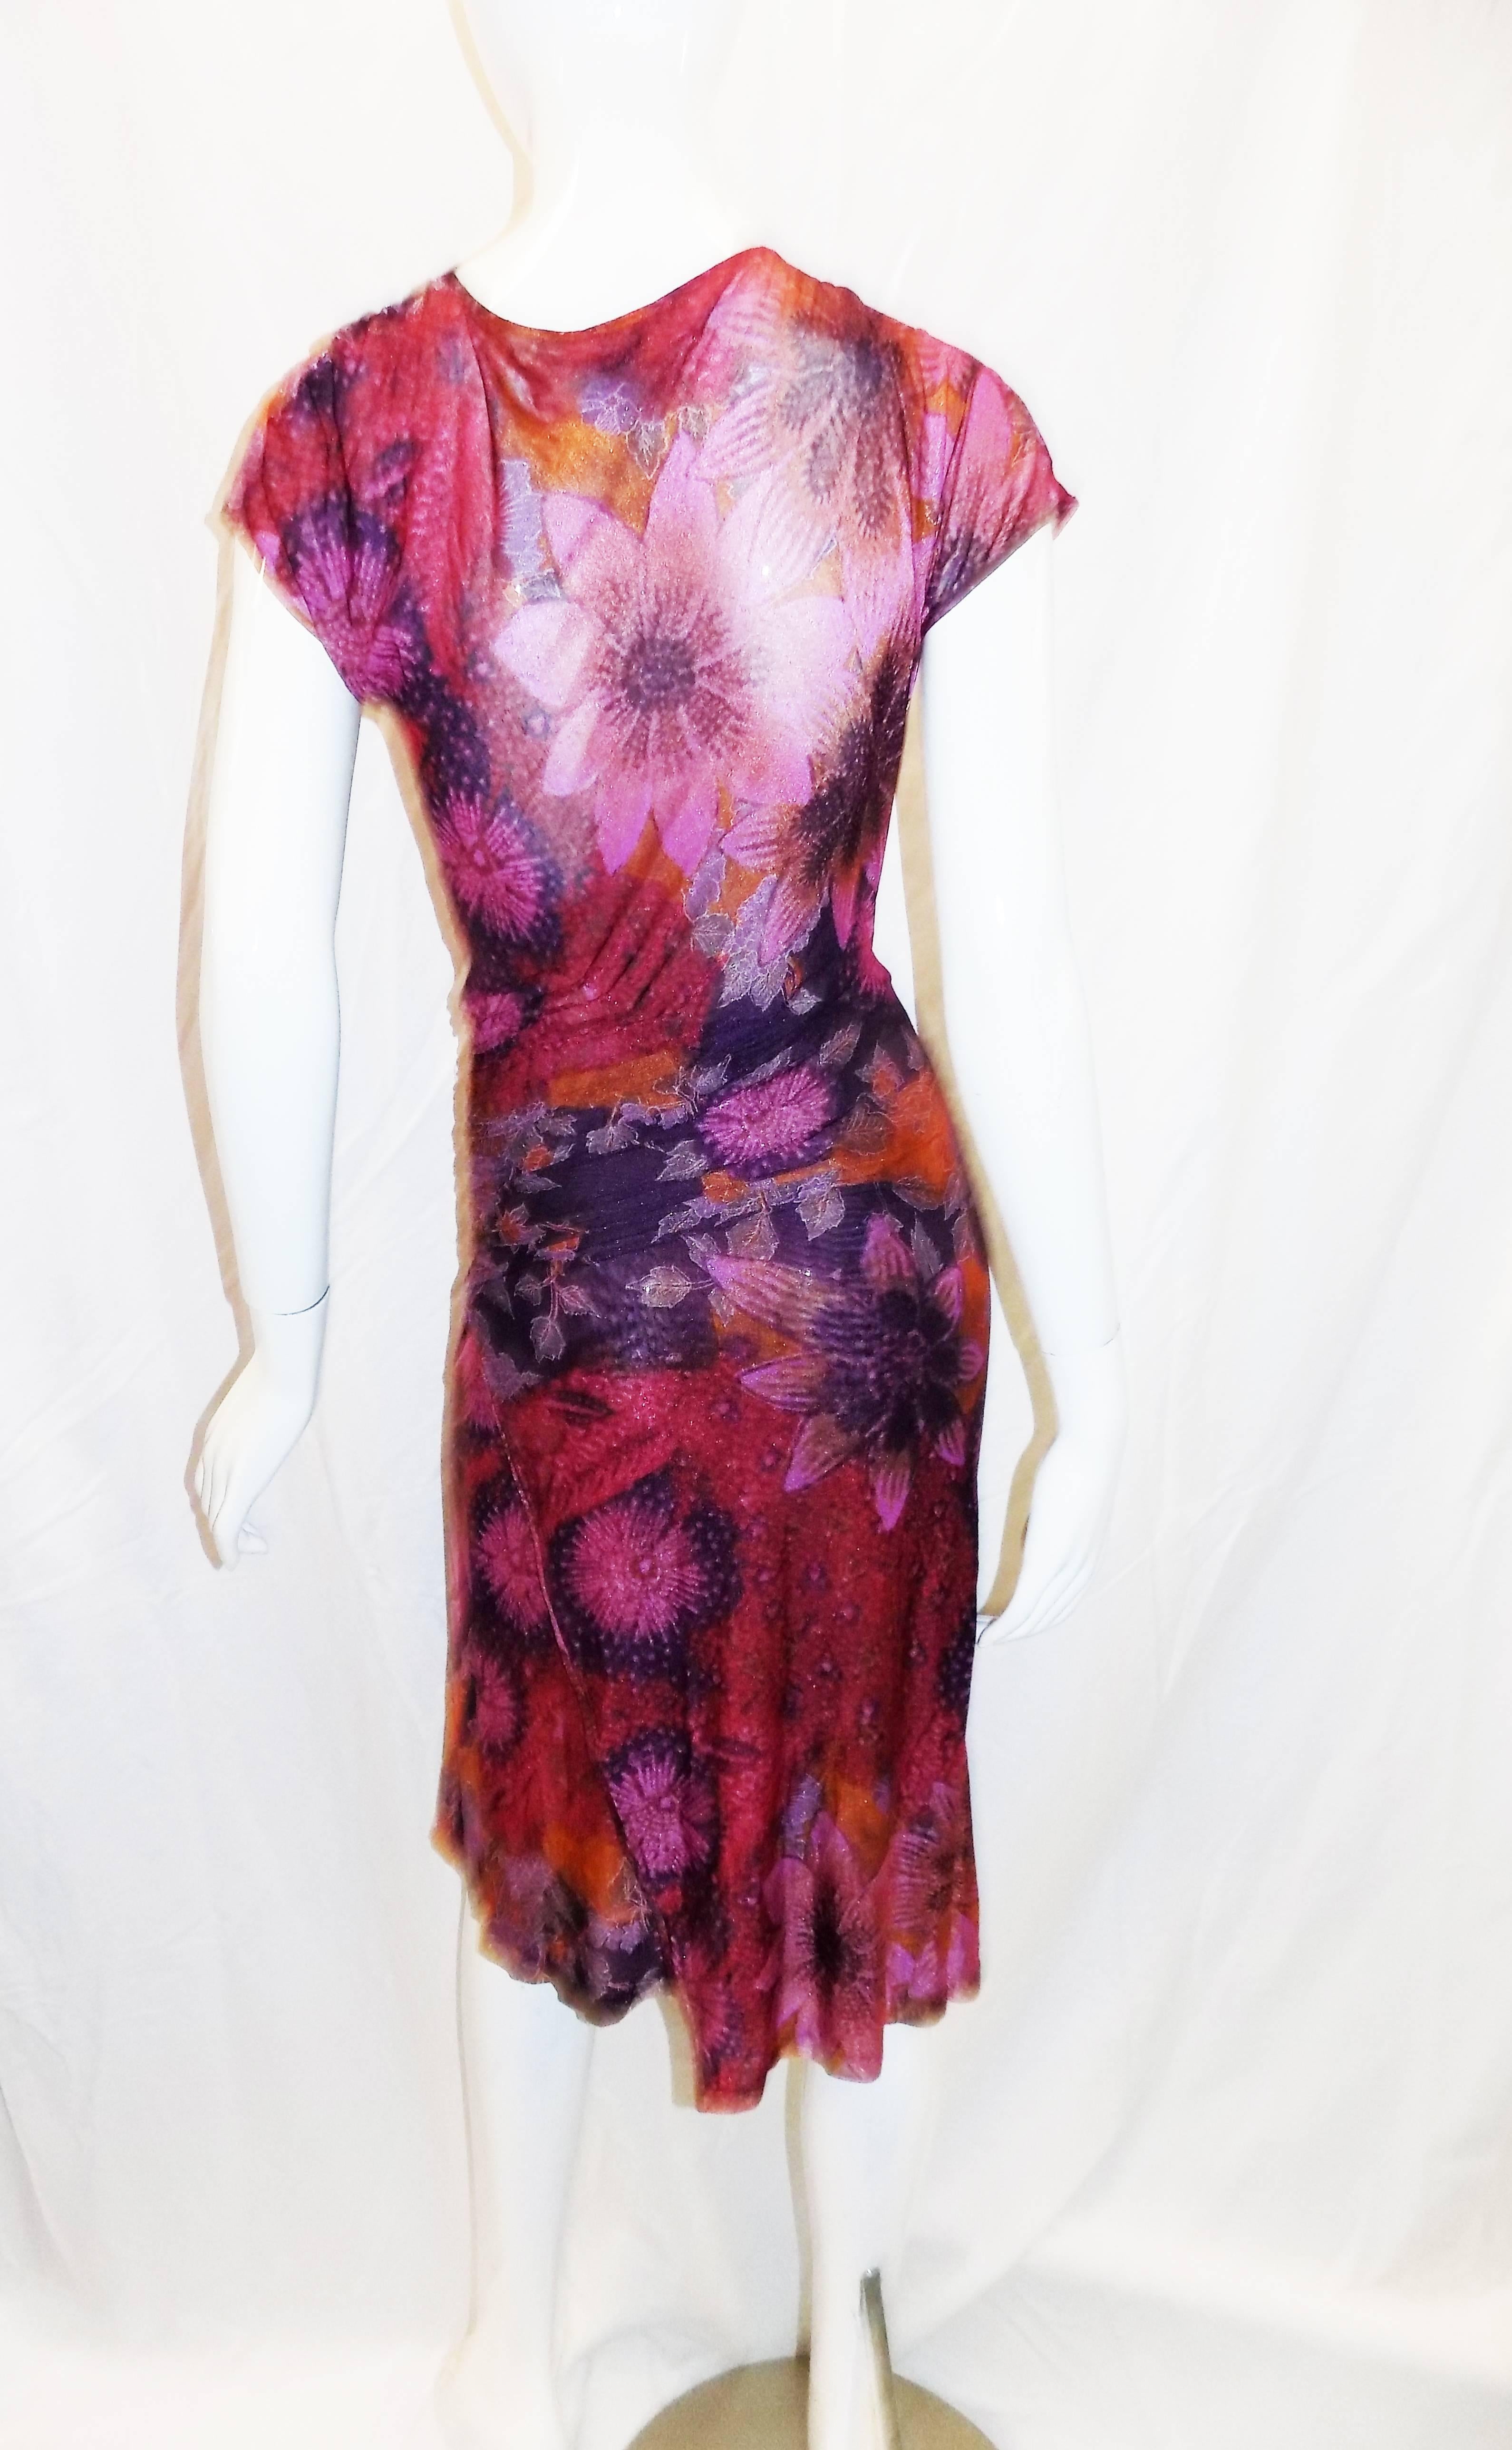 Etro Women's Floral-Print Jersey Dress In Excellent Condition For Sale In New York, NY